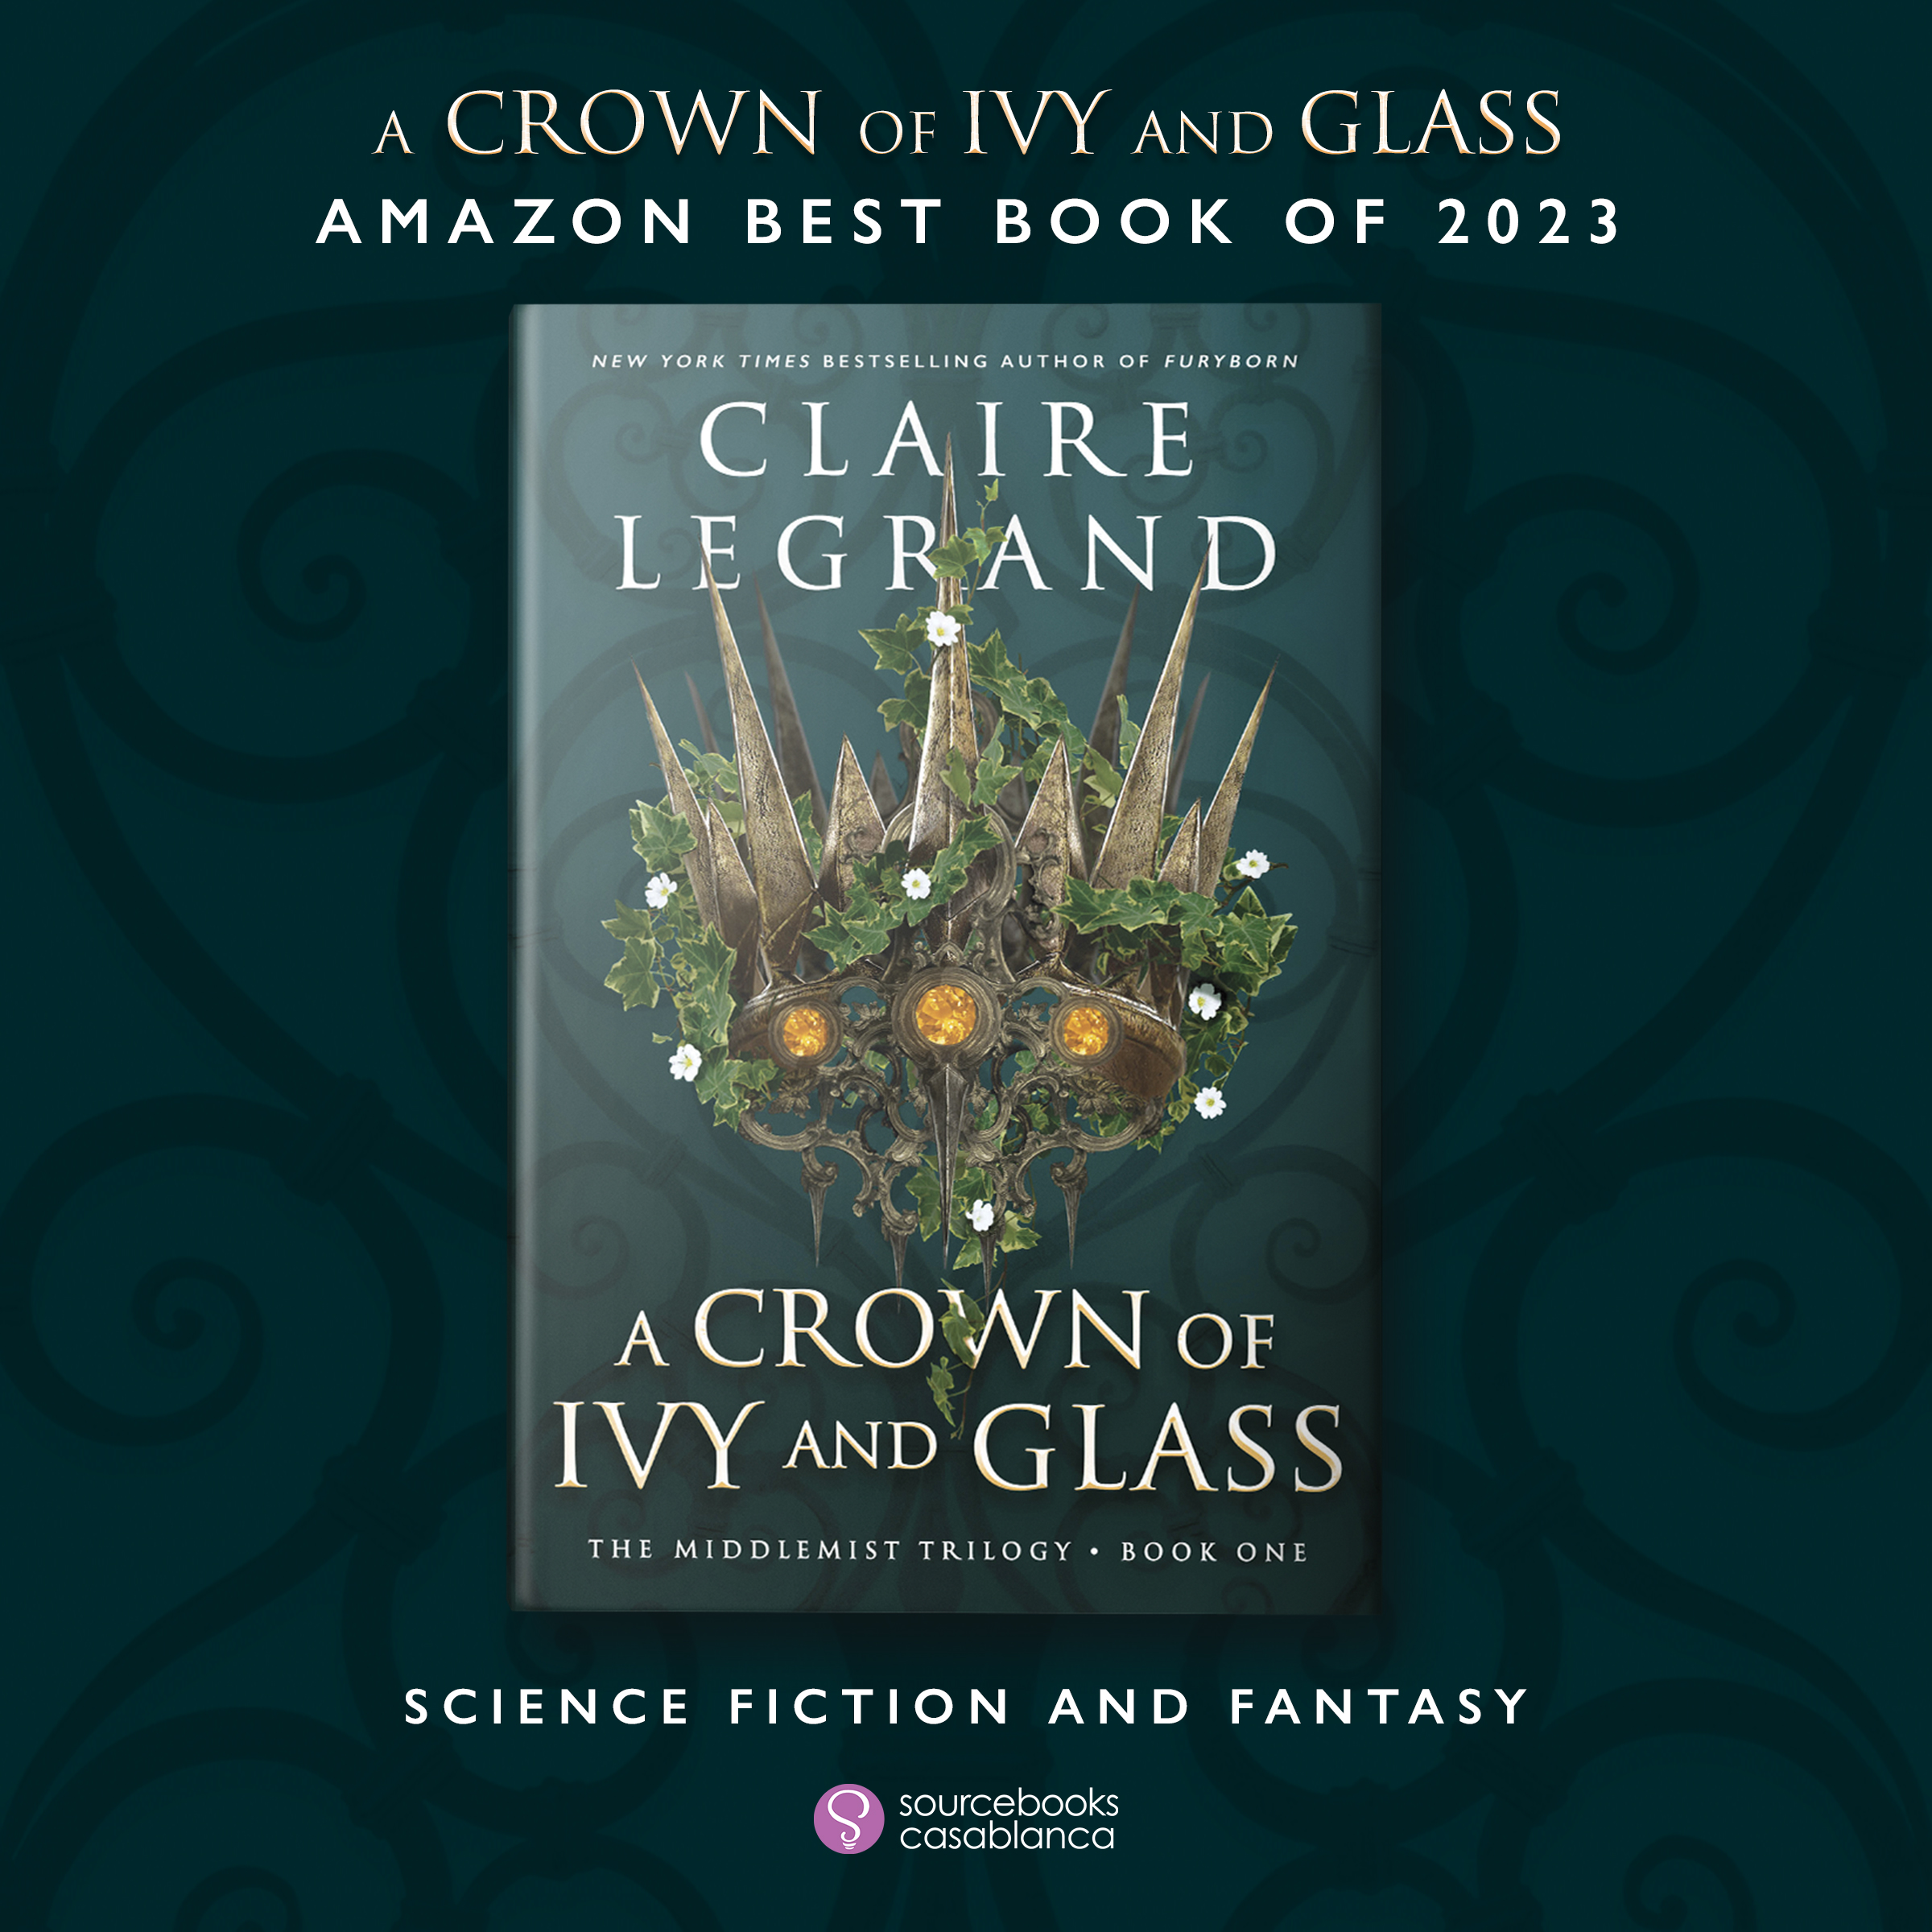 Promo image for A CROWN OF IVY AND GLASS as an Amazon Best Book of 2023 (Science Fiction and Fantasy) selection, featuring the book's cover.